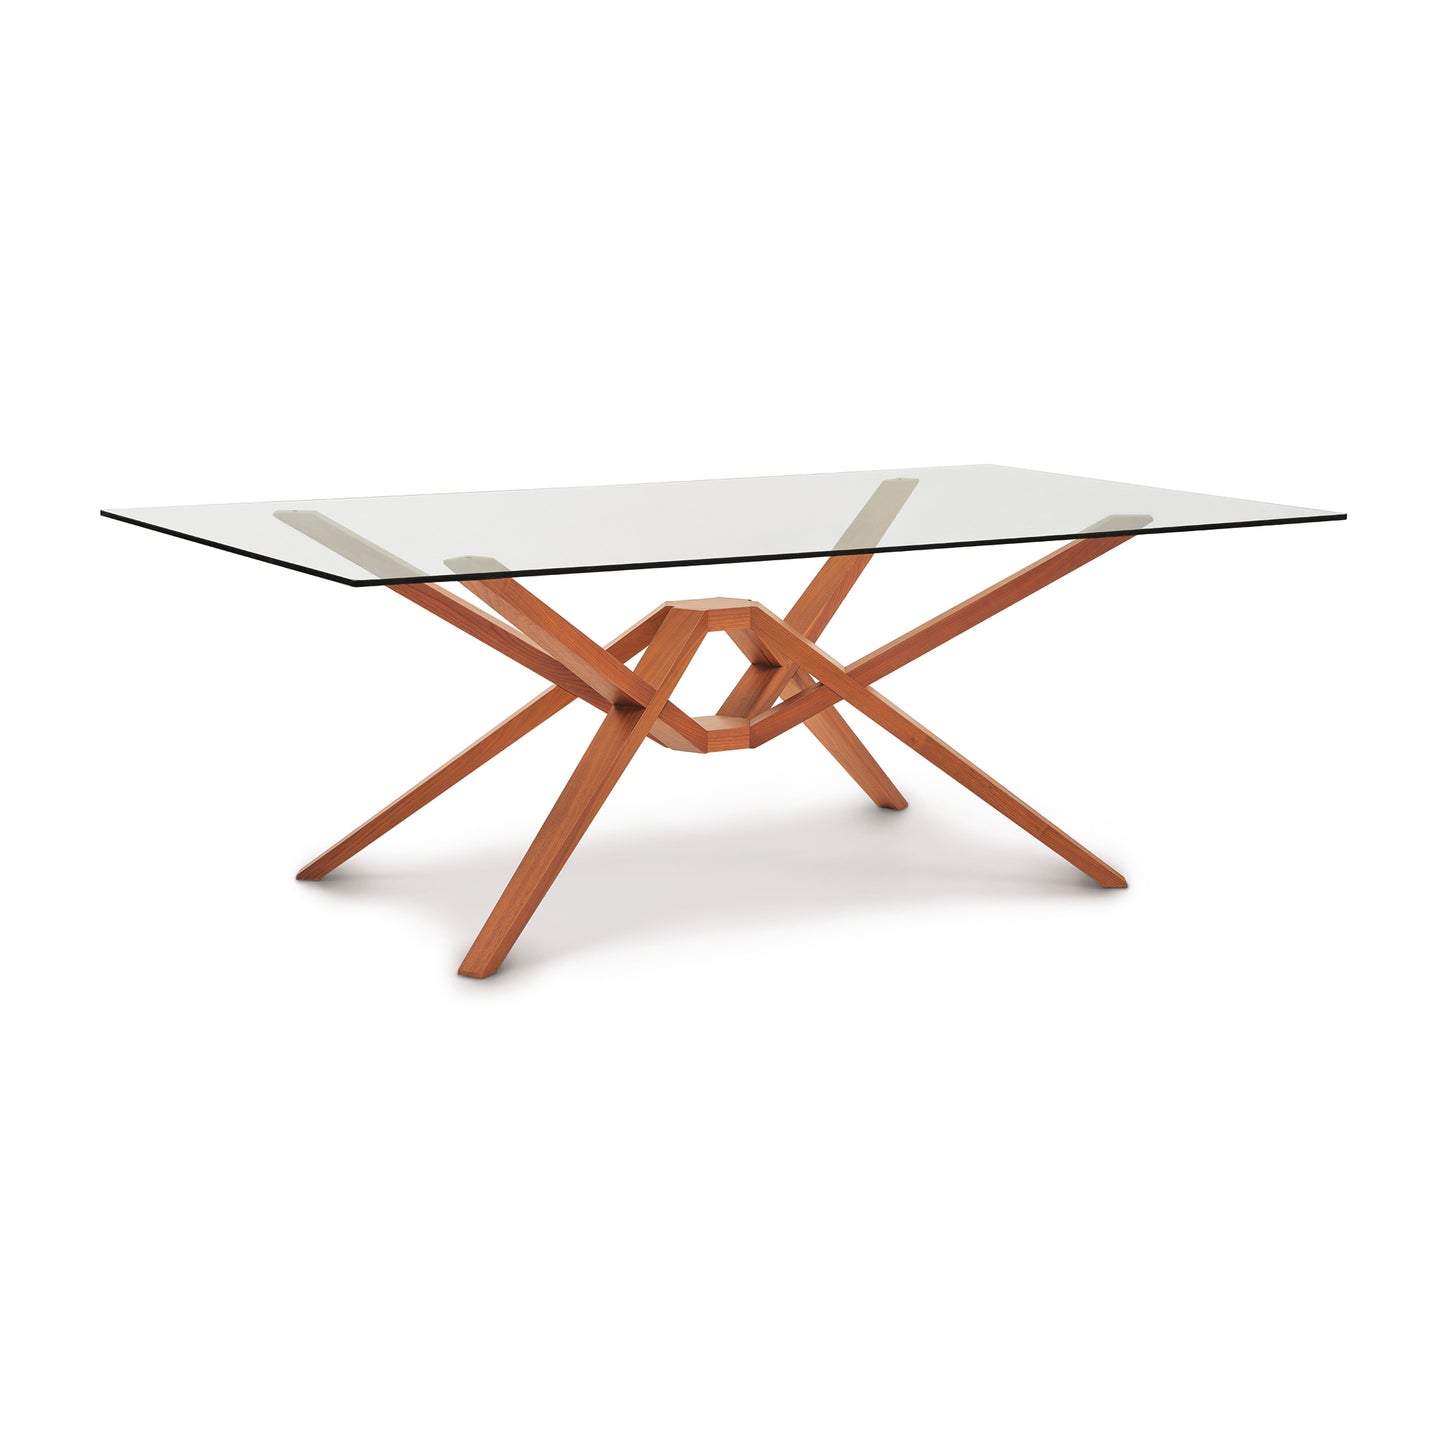 An Exeter Rectangular Glass Top Table crafted by Copeland Furniture, featuring a solid wood interlocking base structure on a white background.